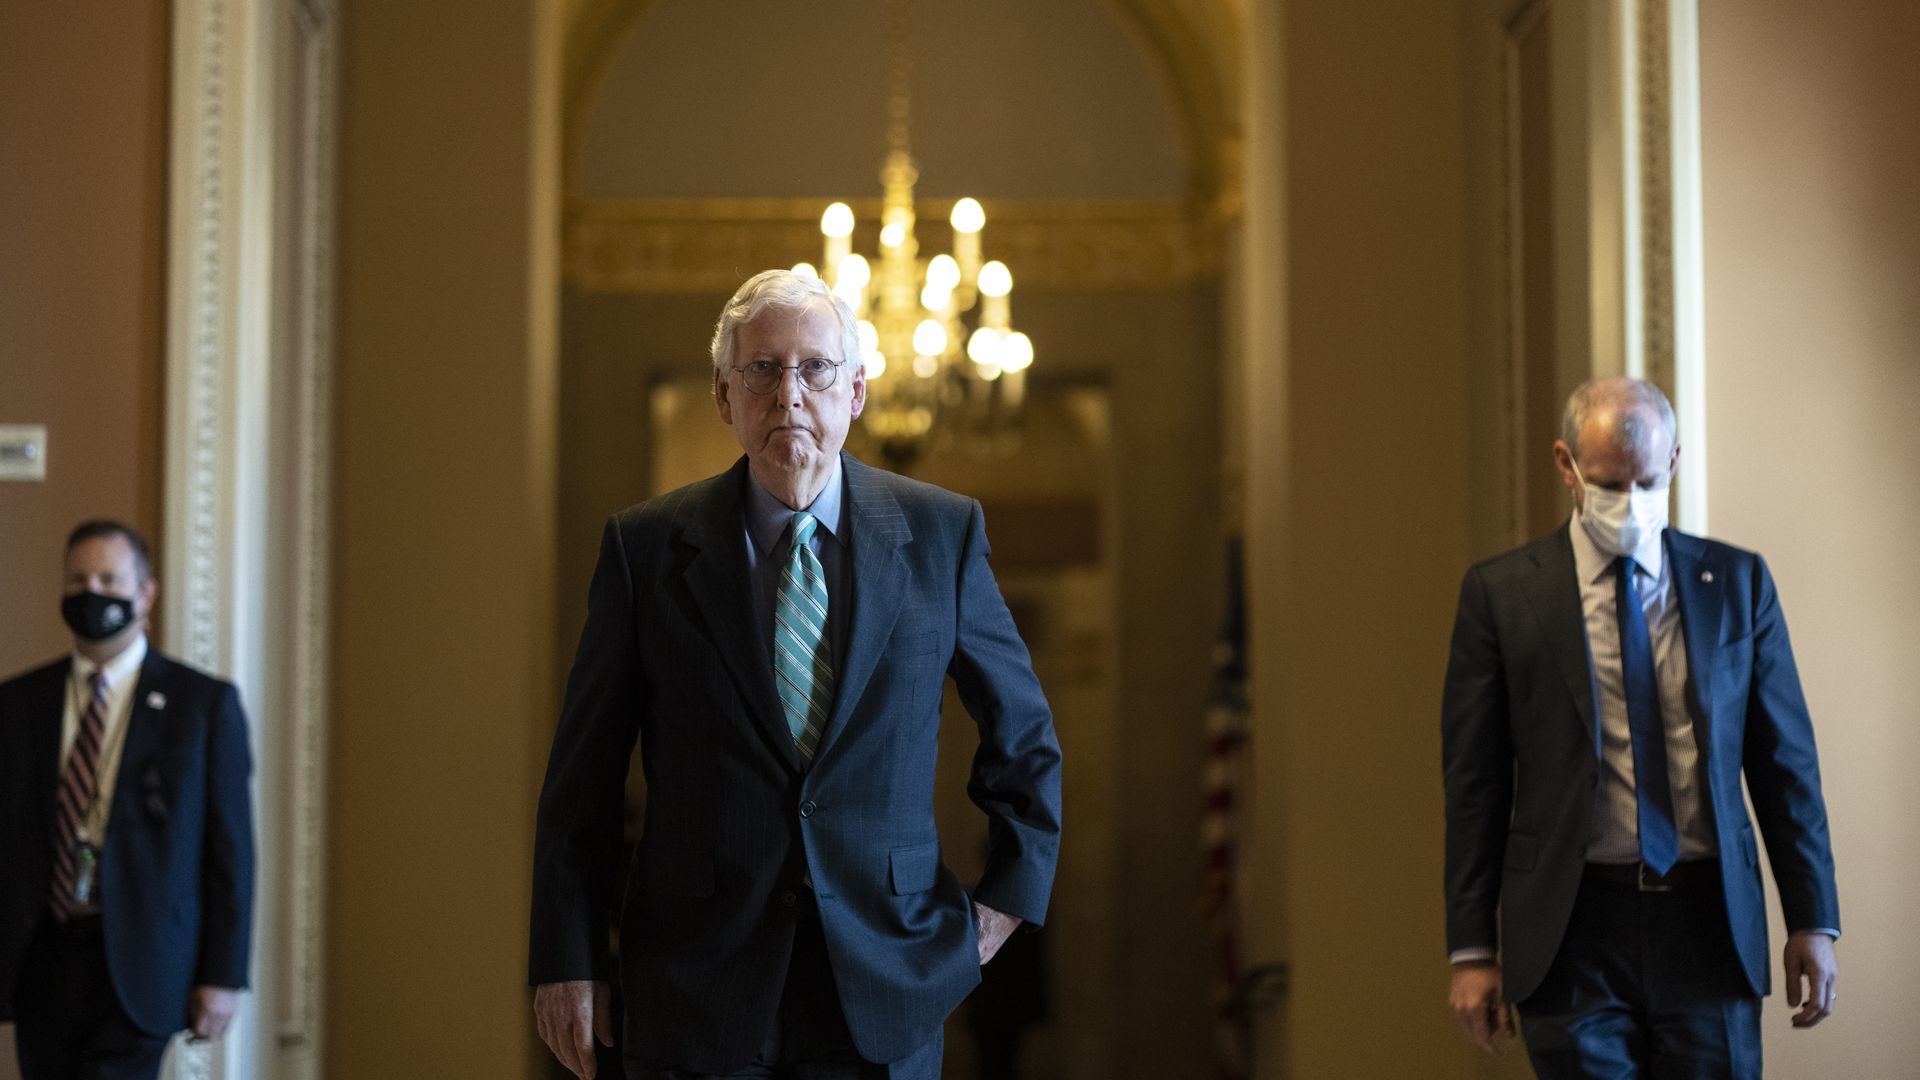 Photo of Mitch McConnell walking the halls of the Capitol with one hand in his pocket